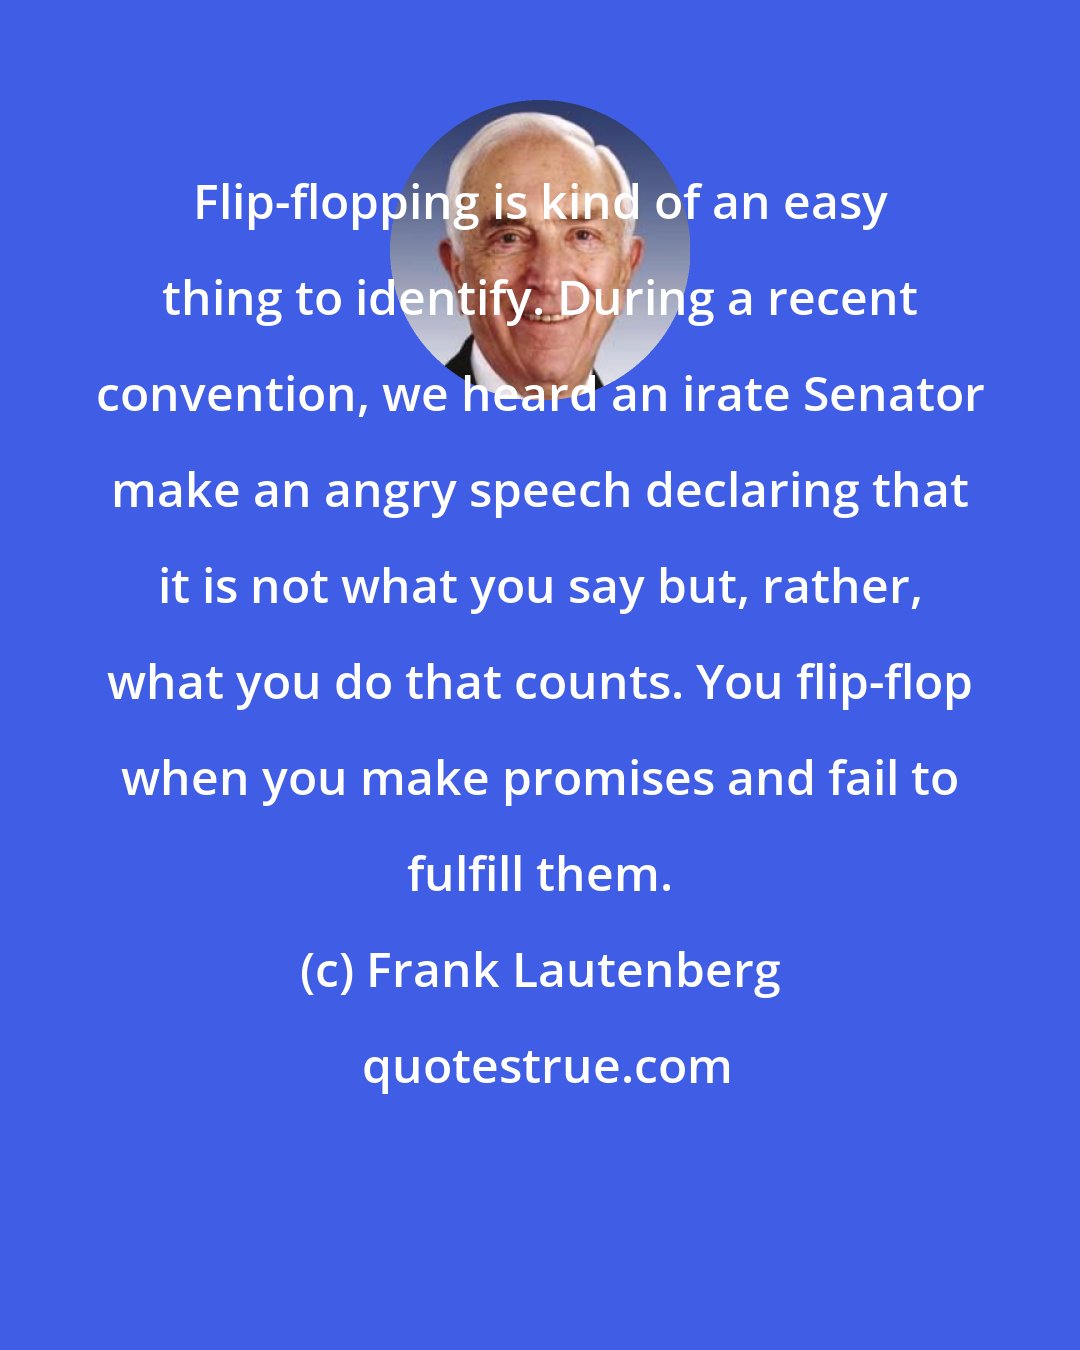 Frank Lautenberg: Flip-flopping is kind of an easy thing to identify. During a recent convention, we heard an irate Senator make an angry speech declaring that it is not what you say but, rather, what you do that counts. You flip-flop when you make promises and fail to fulfill them.